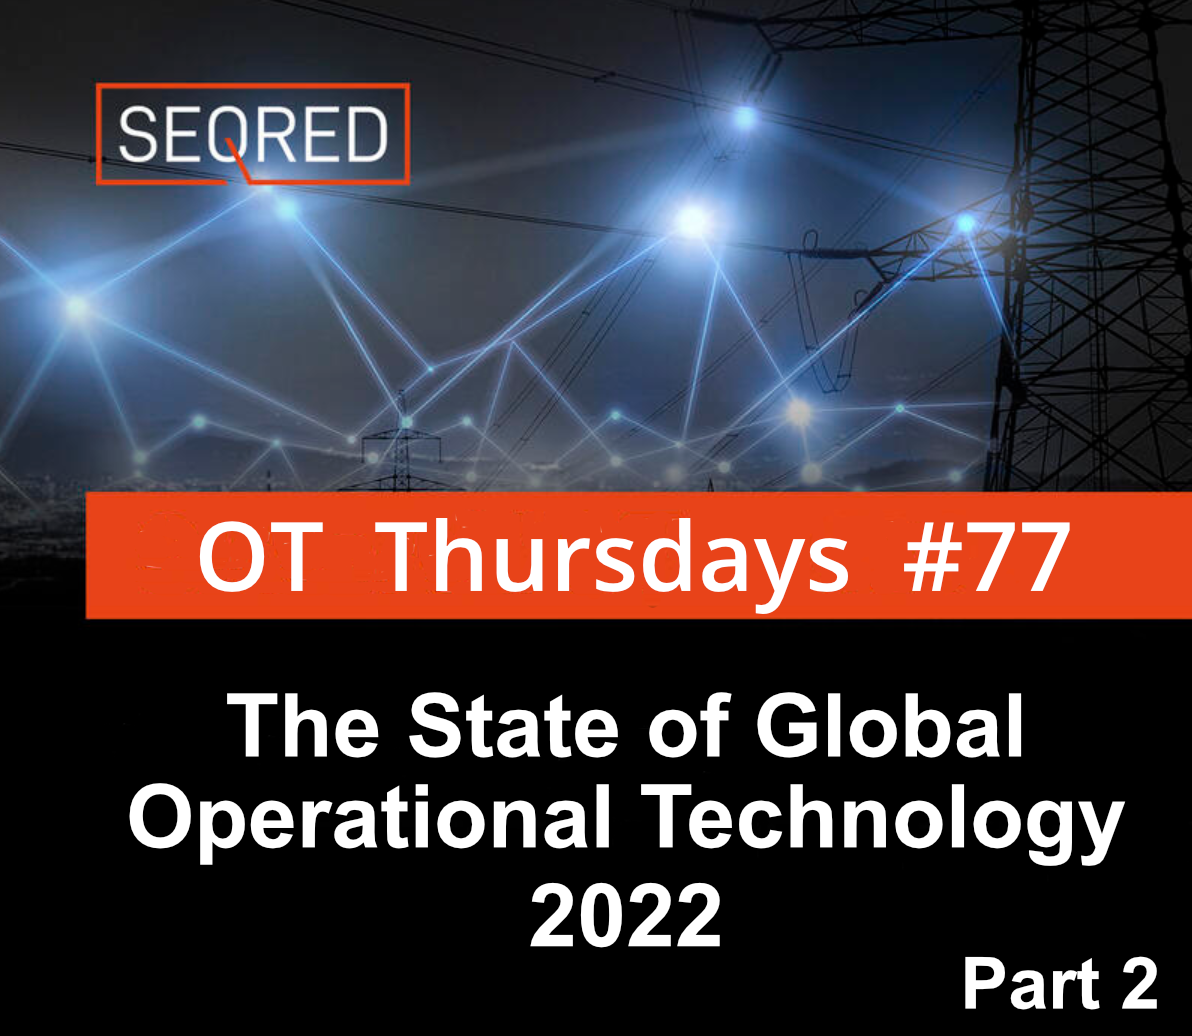 The State of Global Operational Technology 2022